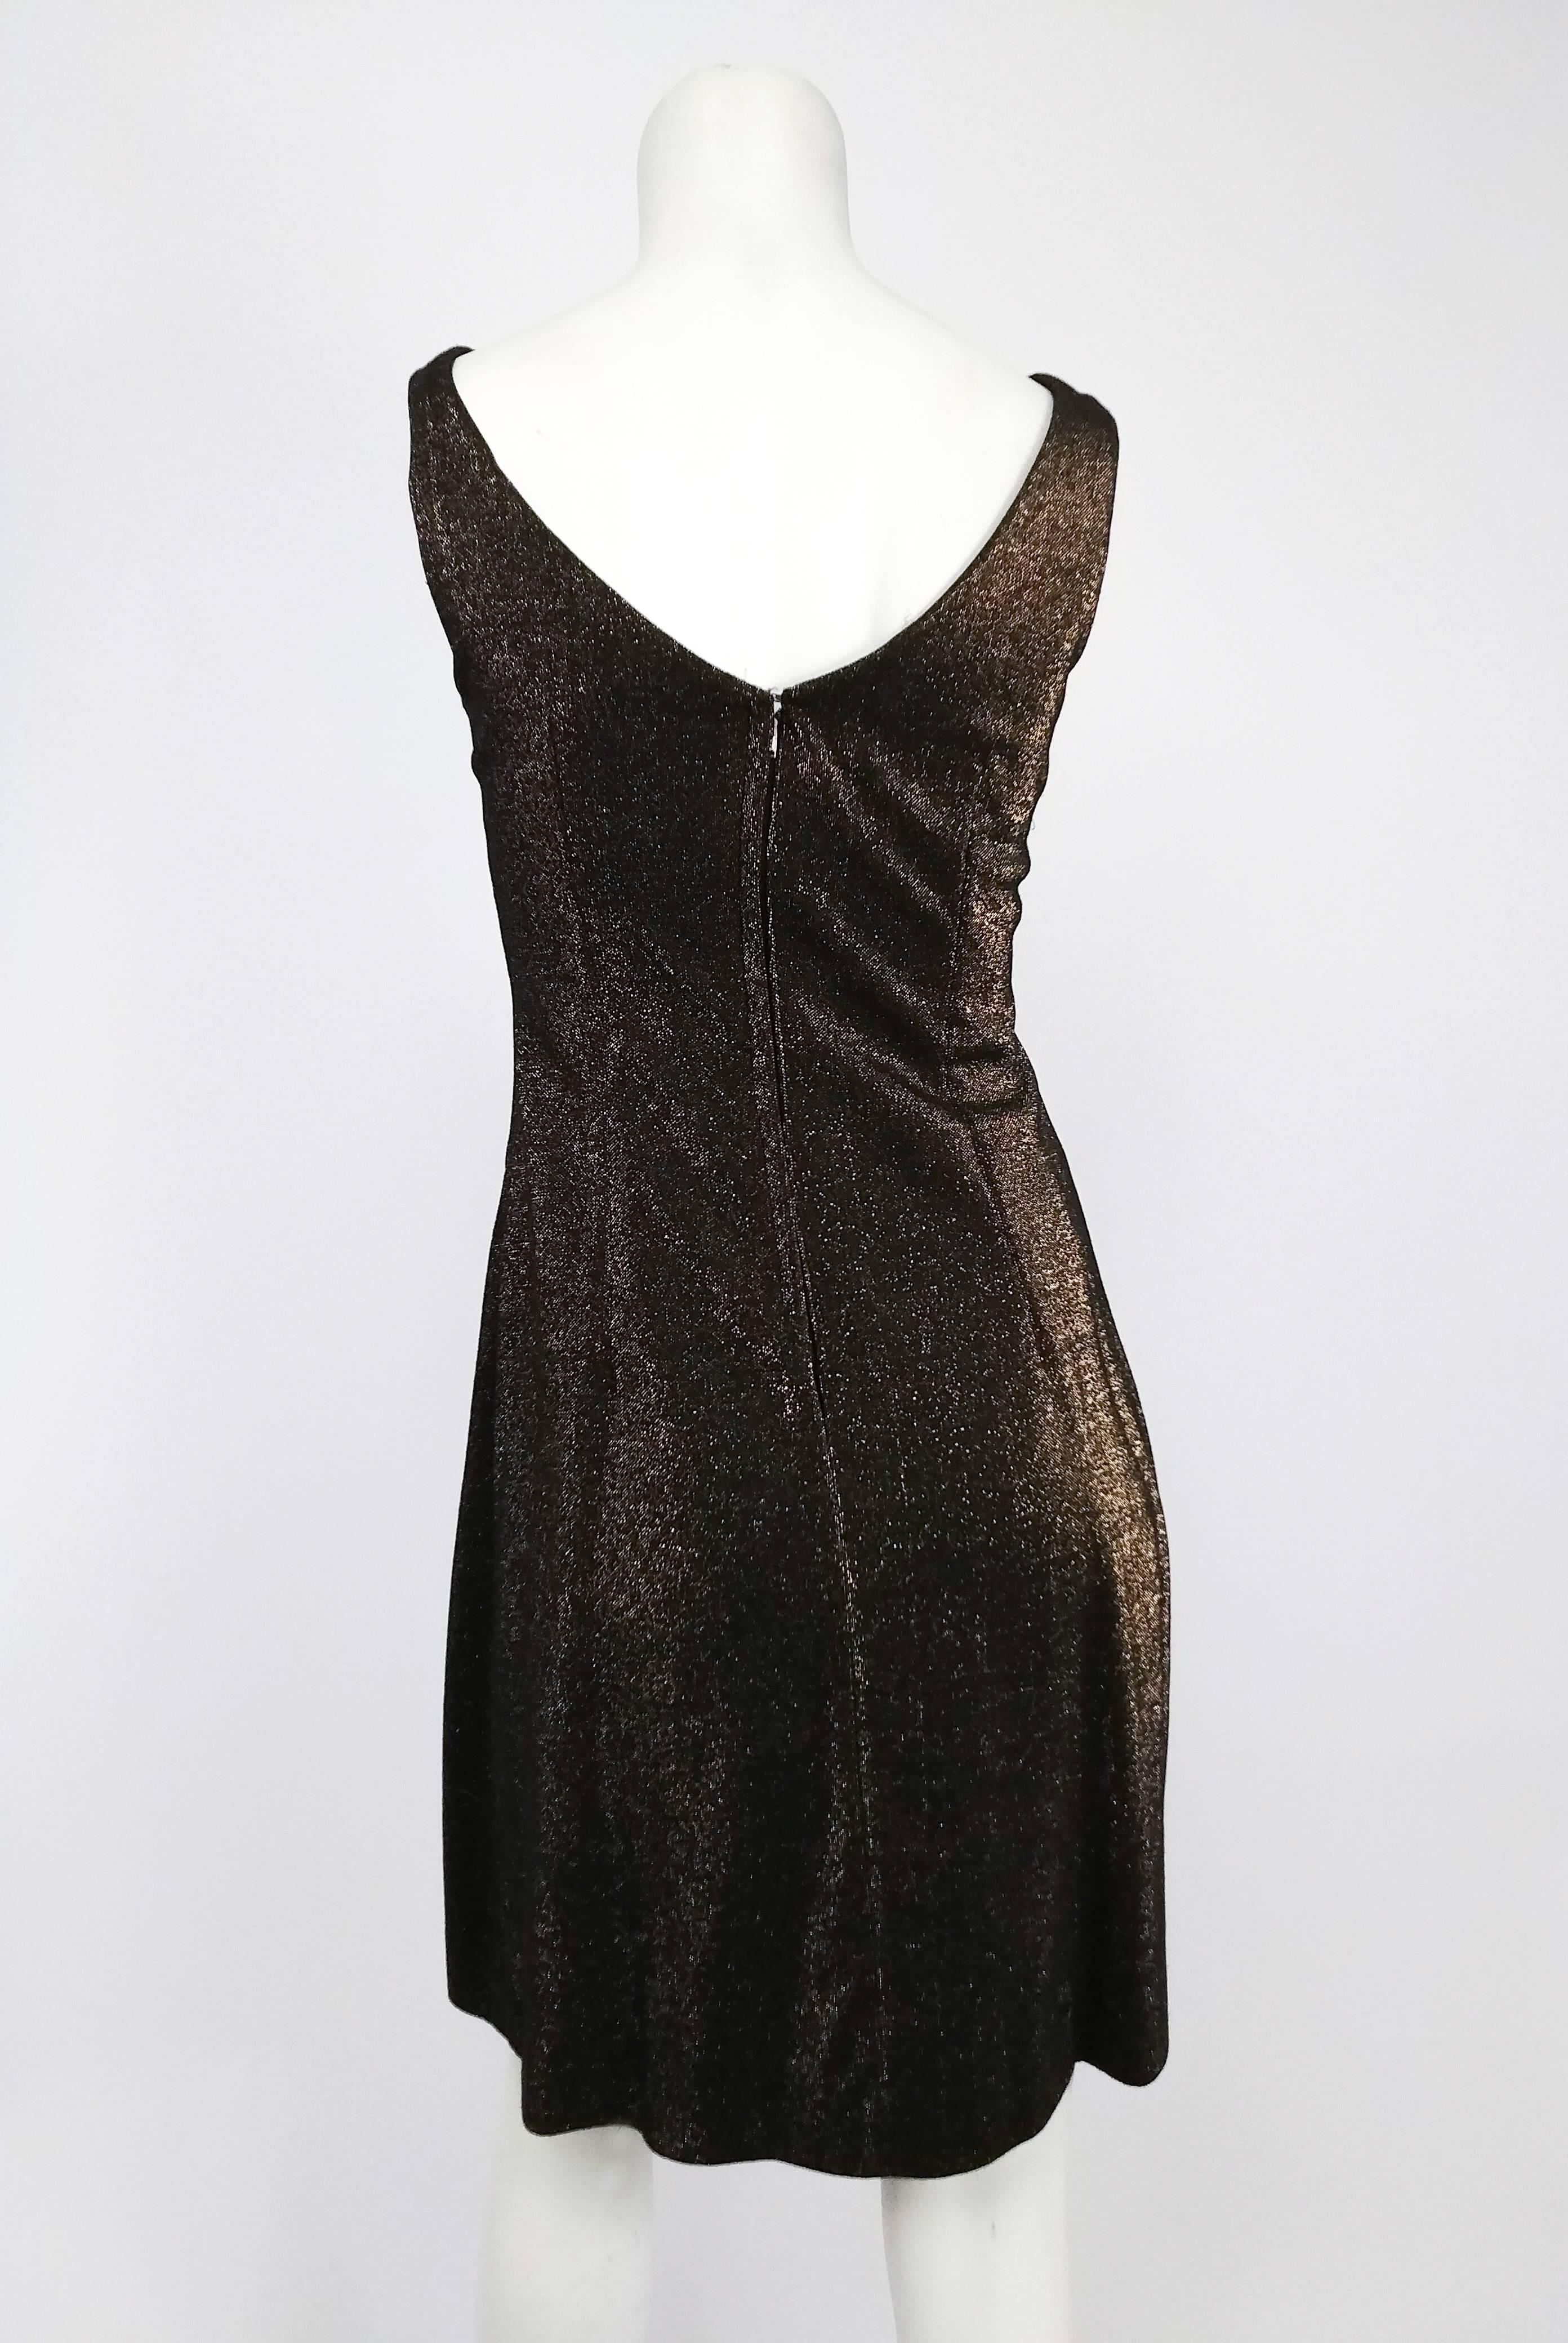 1960s Black & Gold Lamé Mini Cocktail Dress In Good Condition For Sale In San Francisco, CA